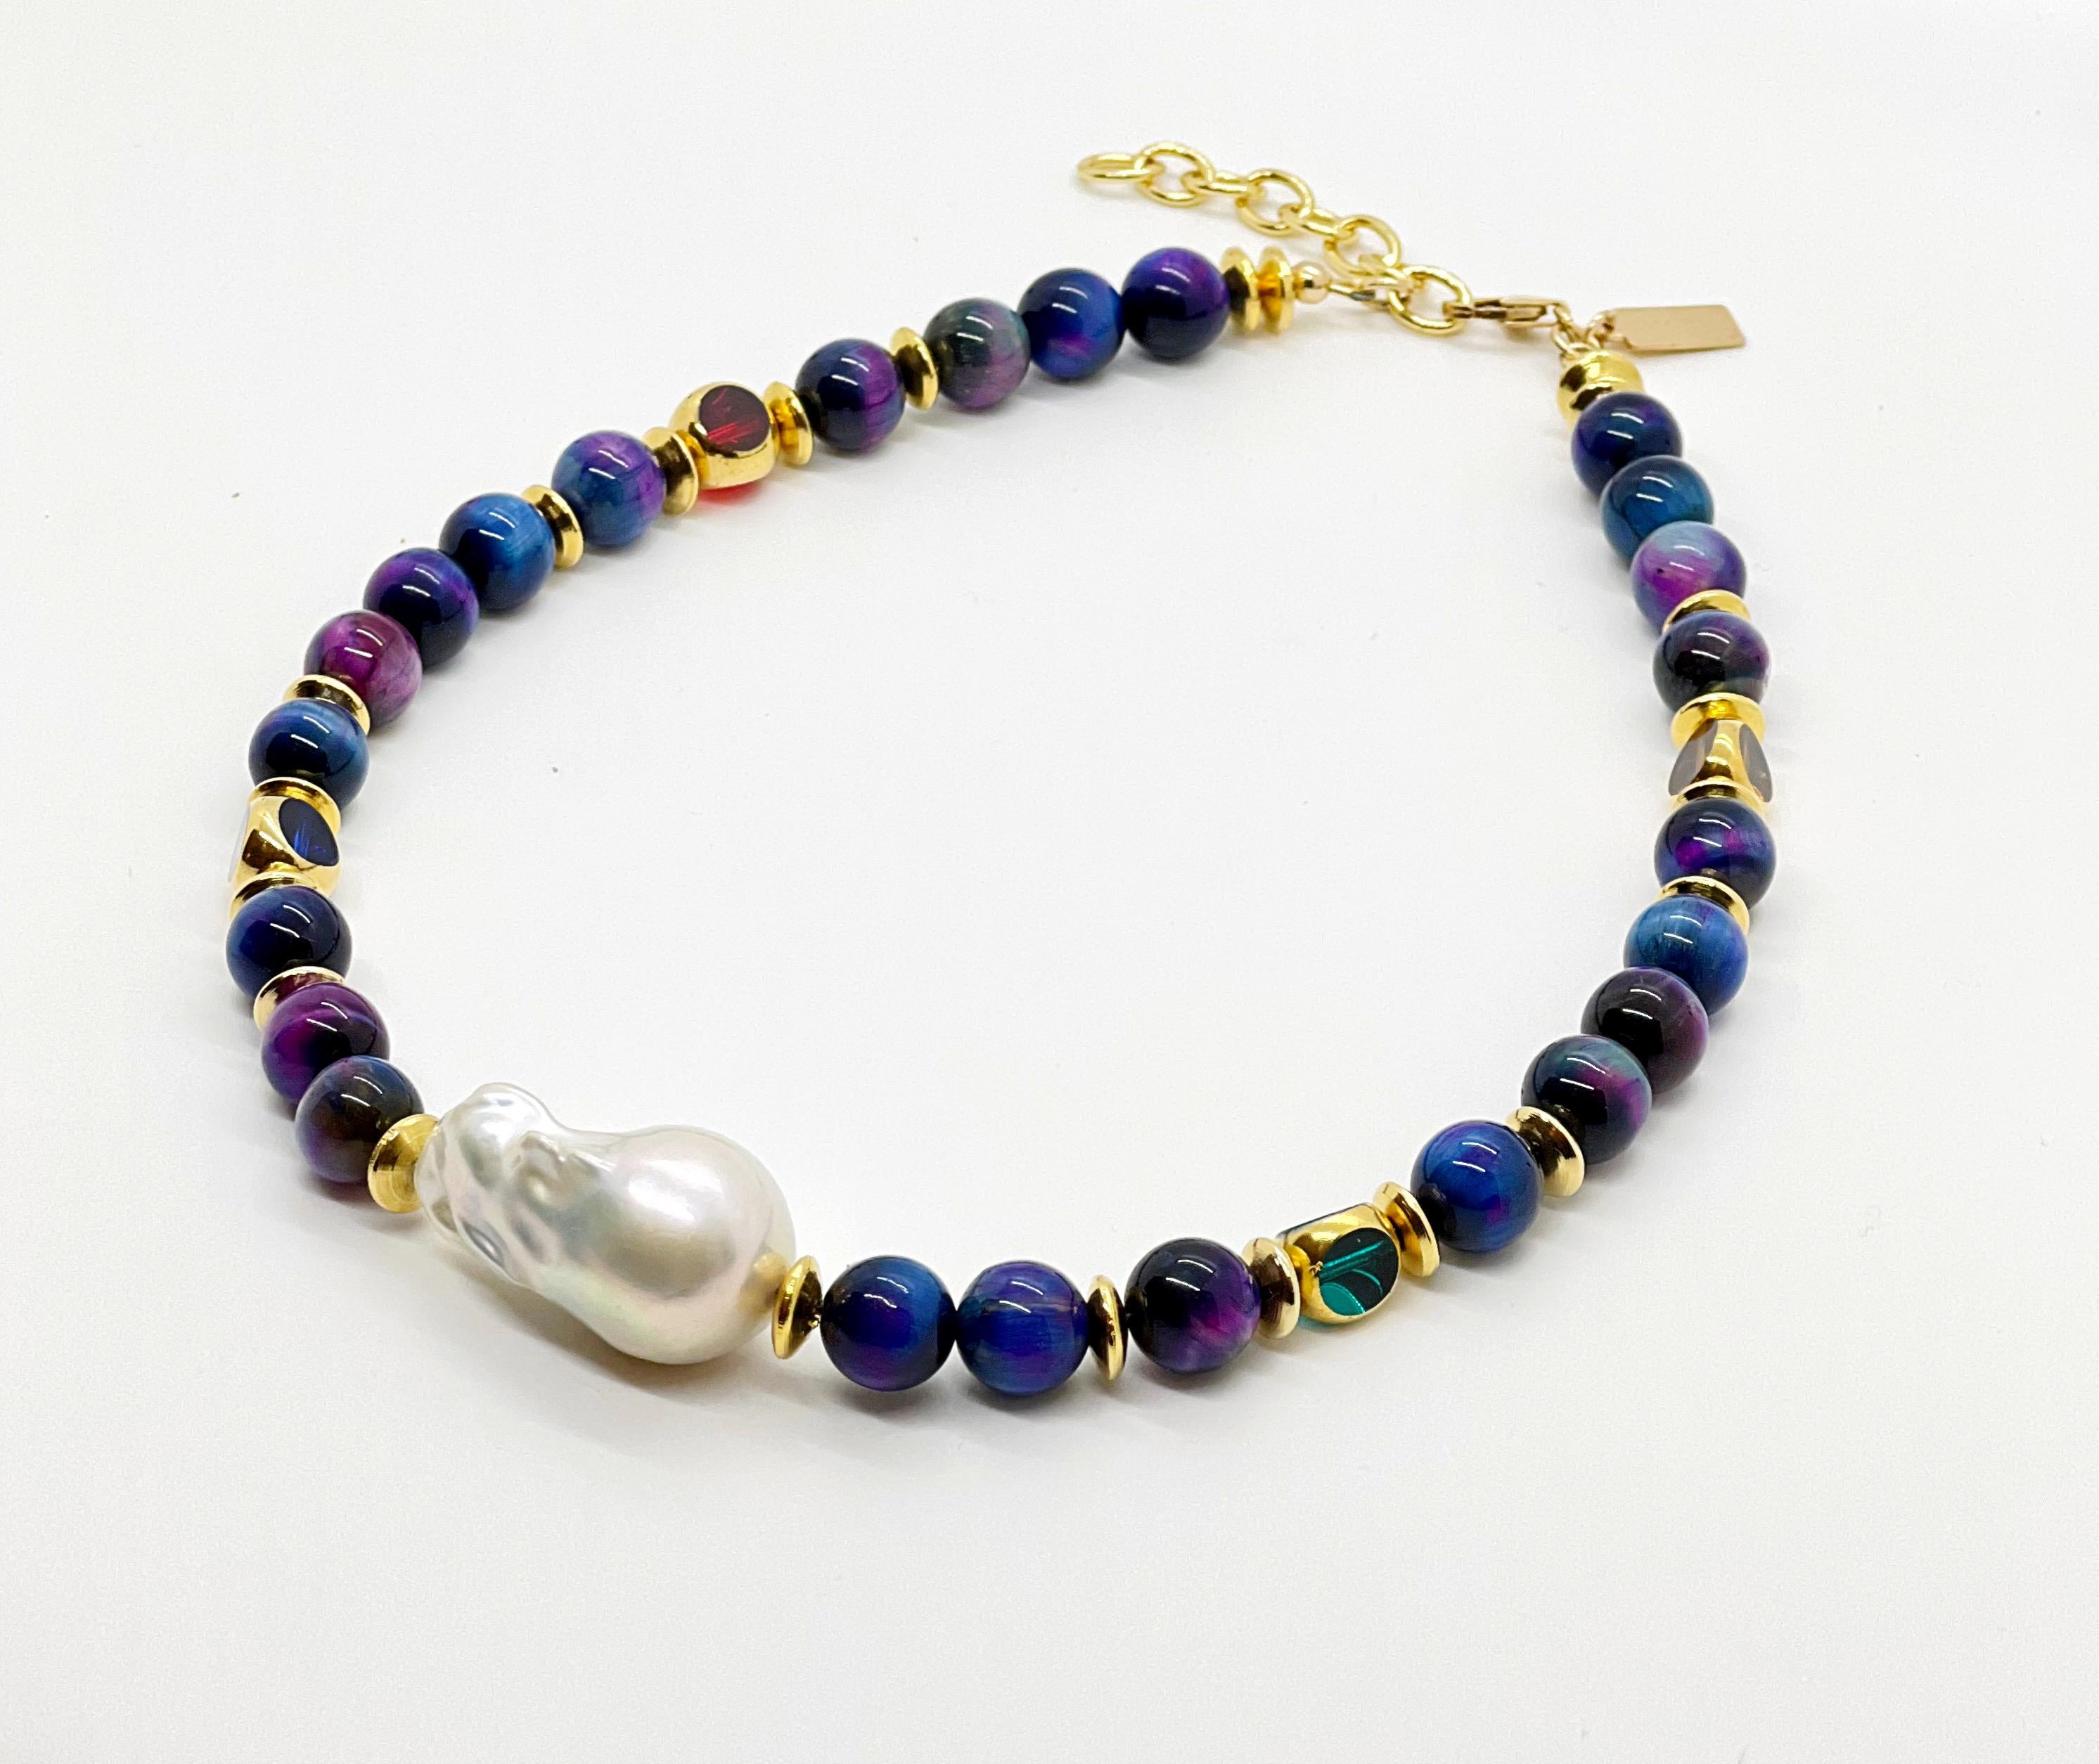 Made of glorious blue tiger eye semi-precious gemstone that reflects colors from purple to blue with hints of golden brown. It is complimented by transparent colorful German vintage glass beads that are edged with 24K gold. On the center is a large